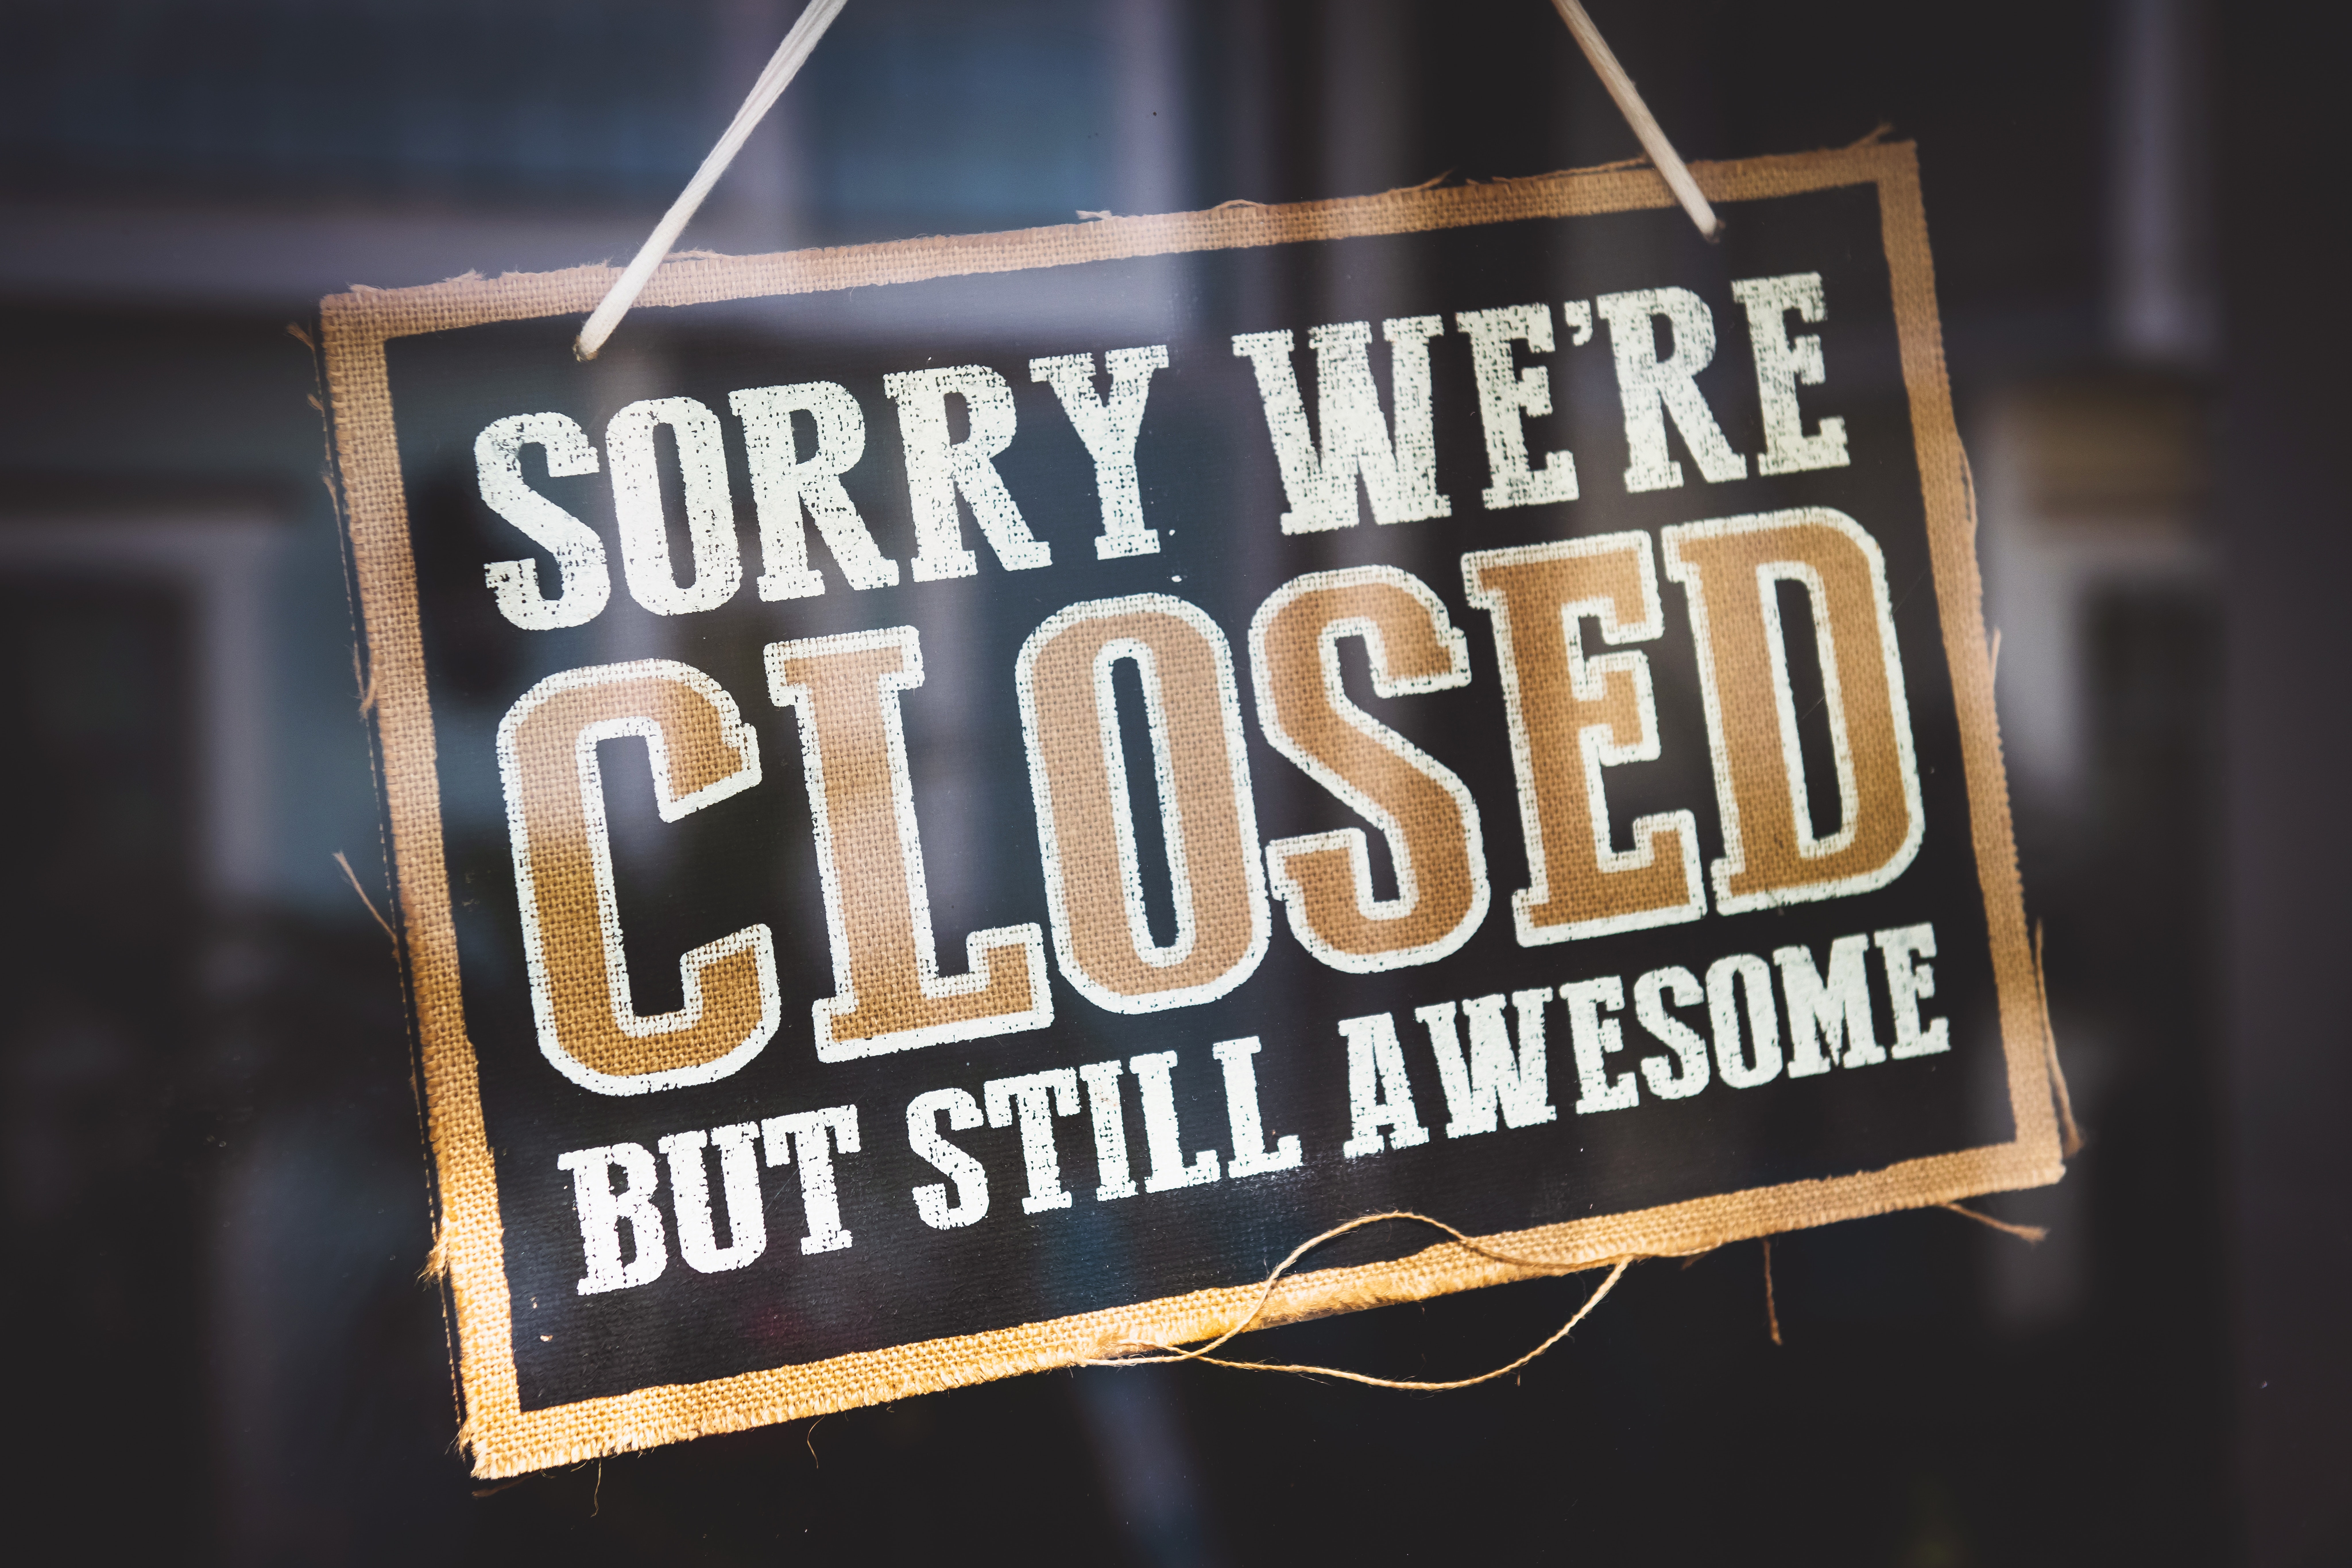 sorry we're closed sign hanging on glass window